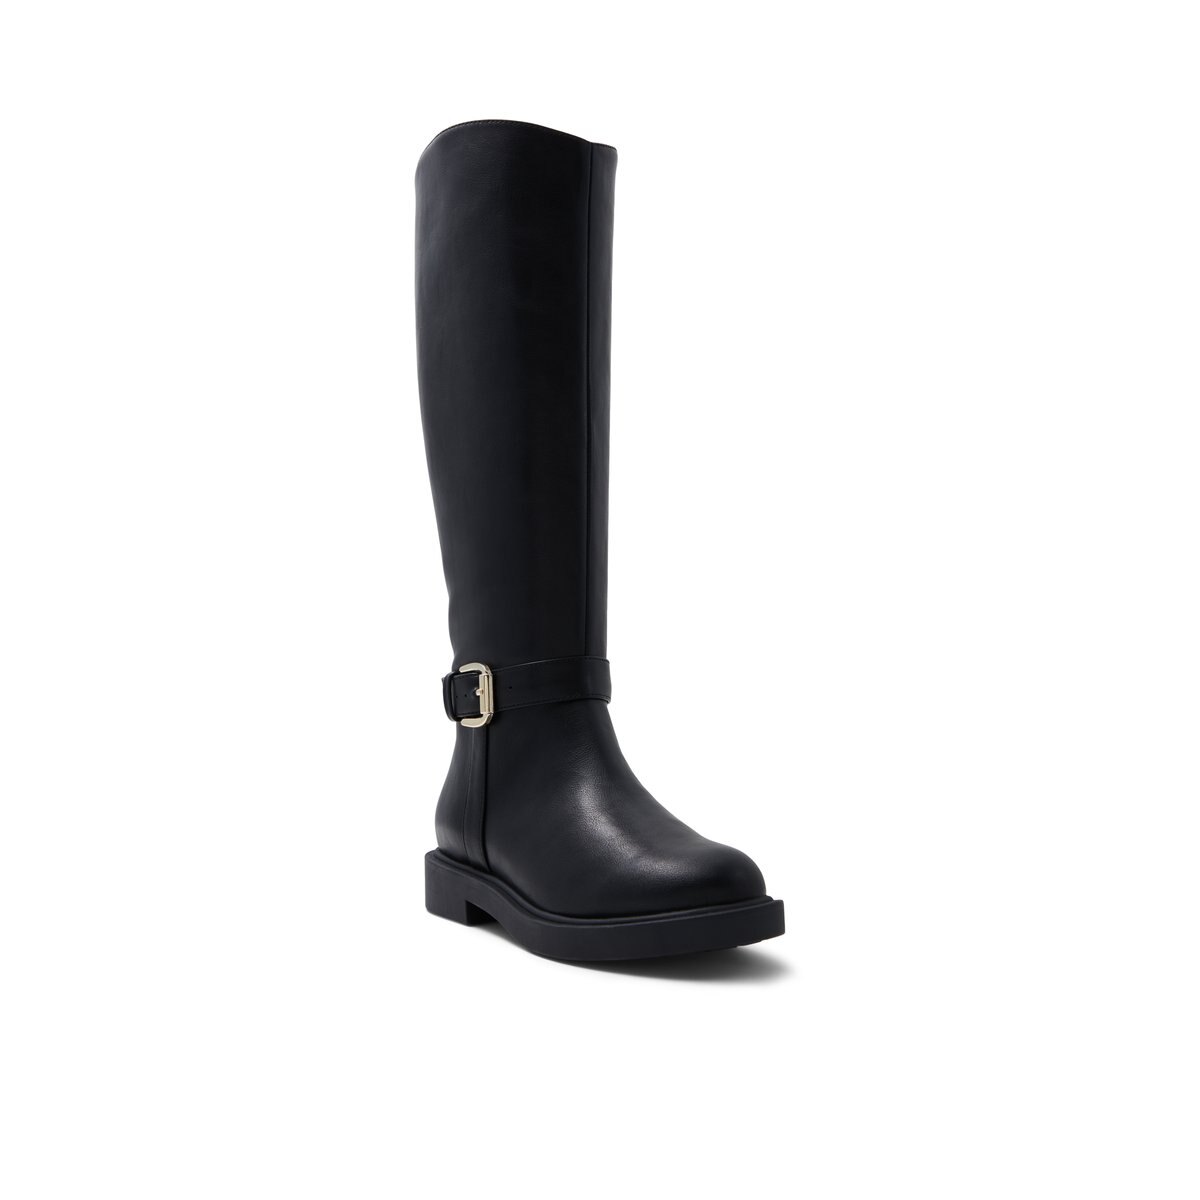 Bobbie Black Women's Knee-high Boots | Call It Spring Canada